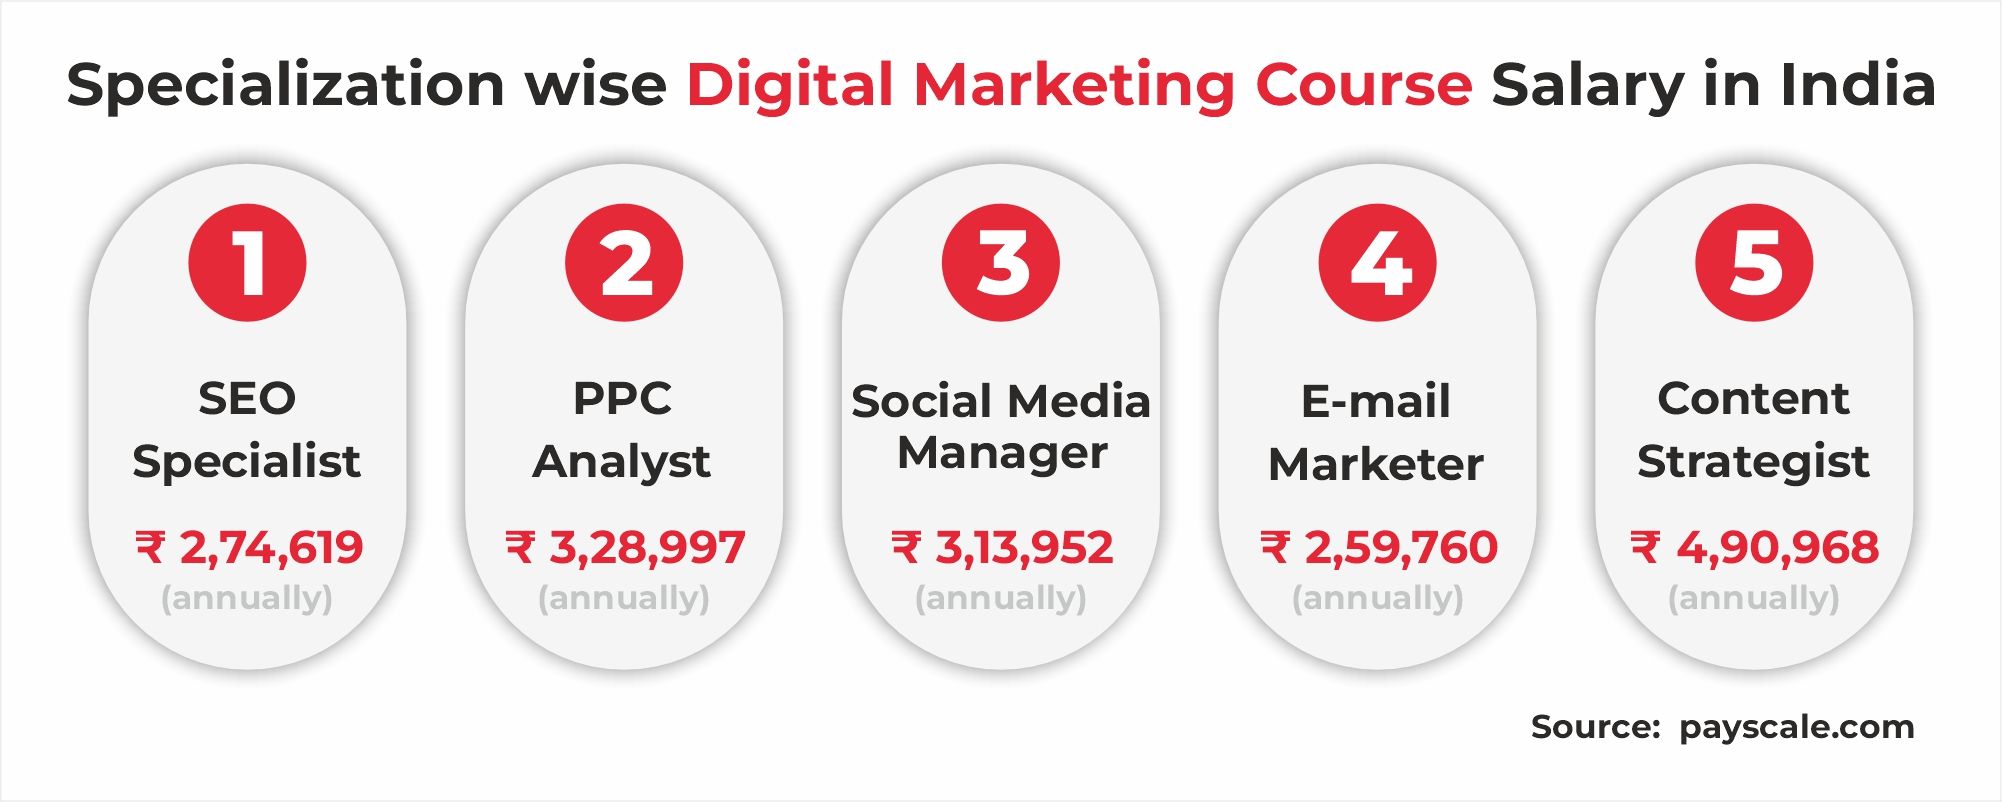 Specialization wise digital marketing course salary in India